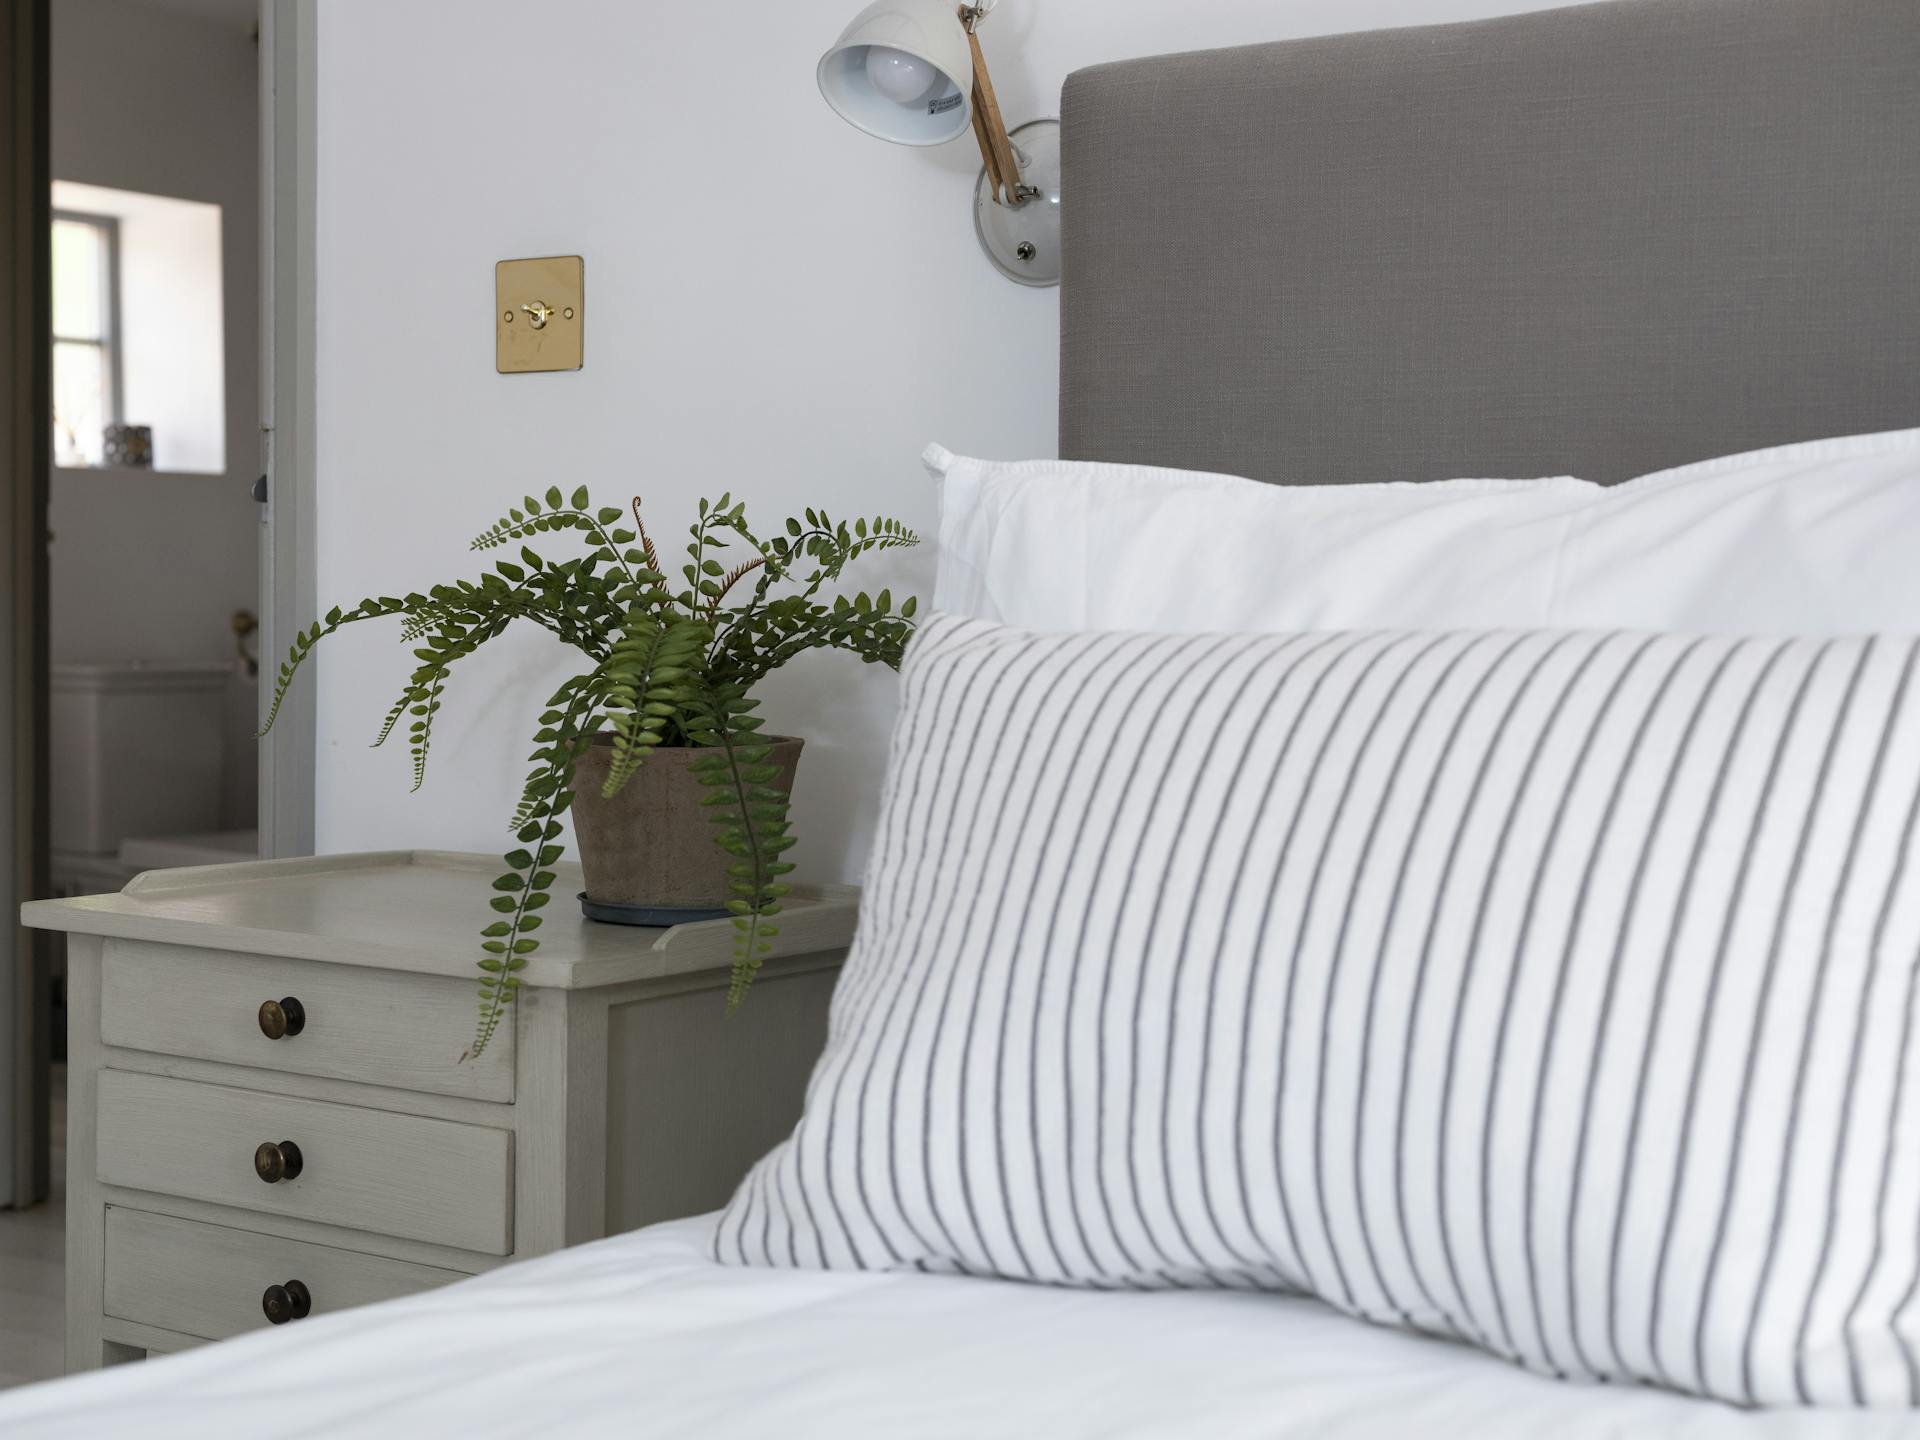 Artificial button fern plant on bedside table